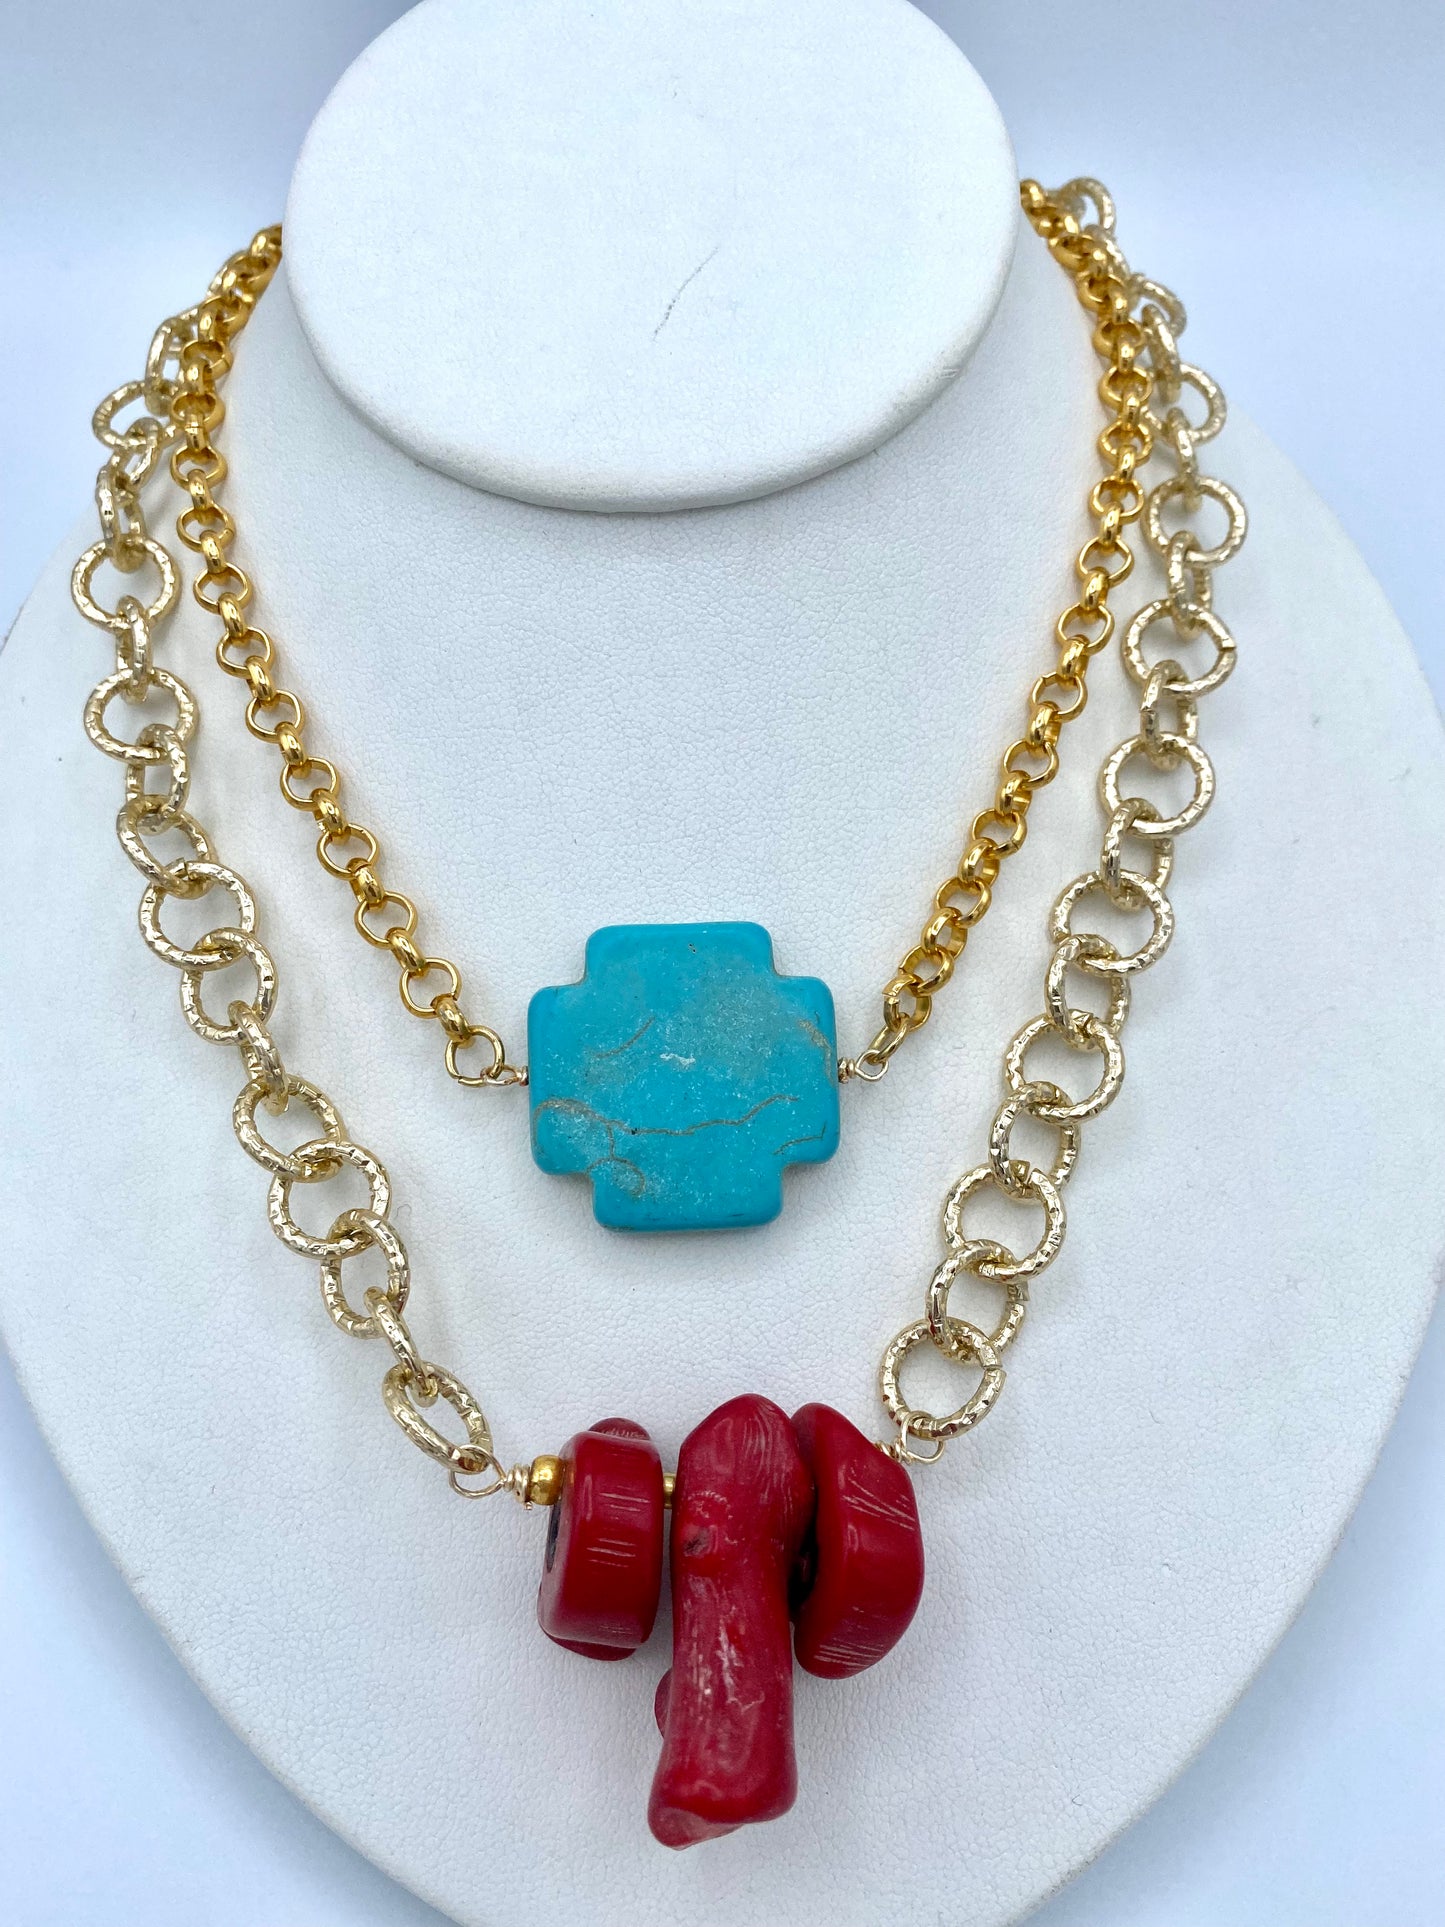 N06-CHOKER NECKLACE - CROSS TURQUOISE